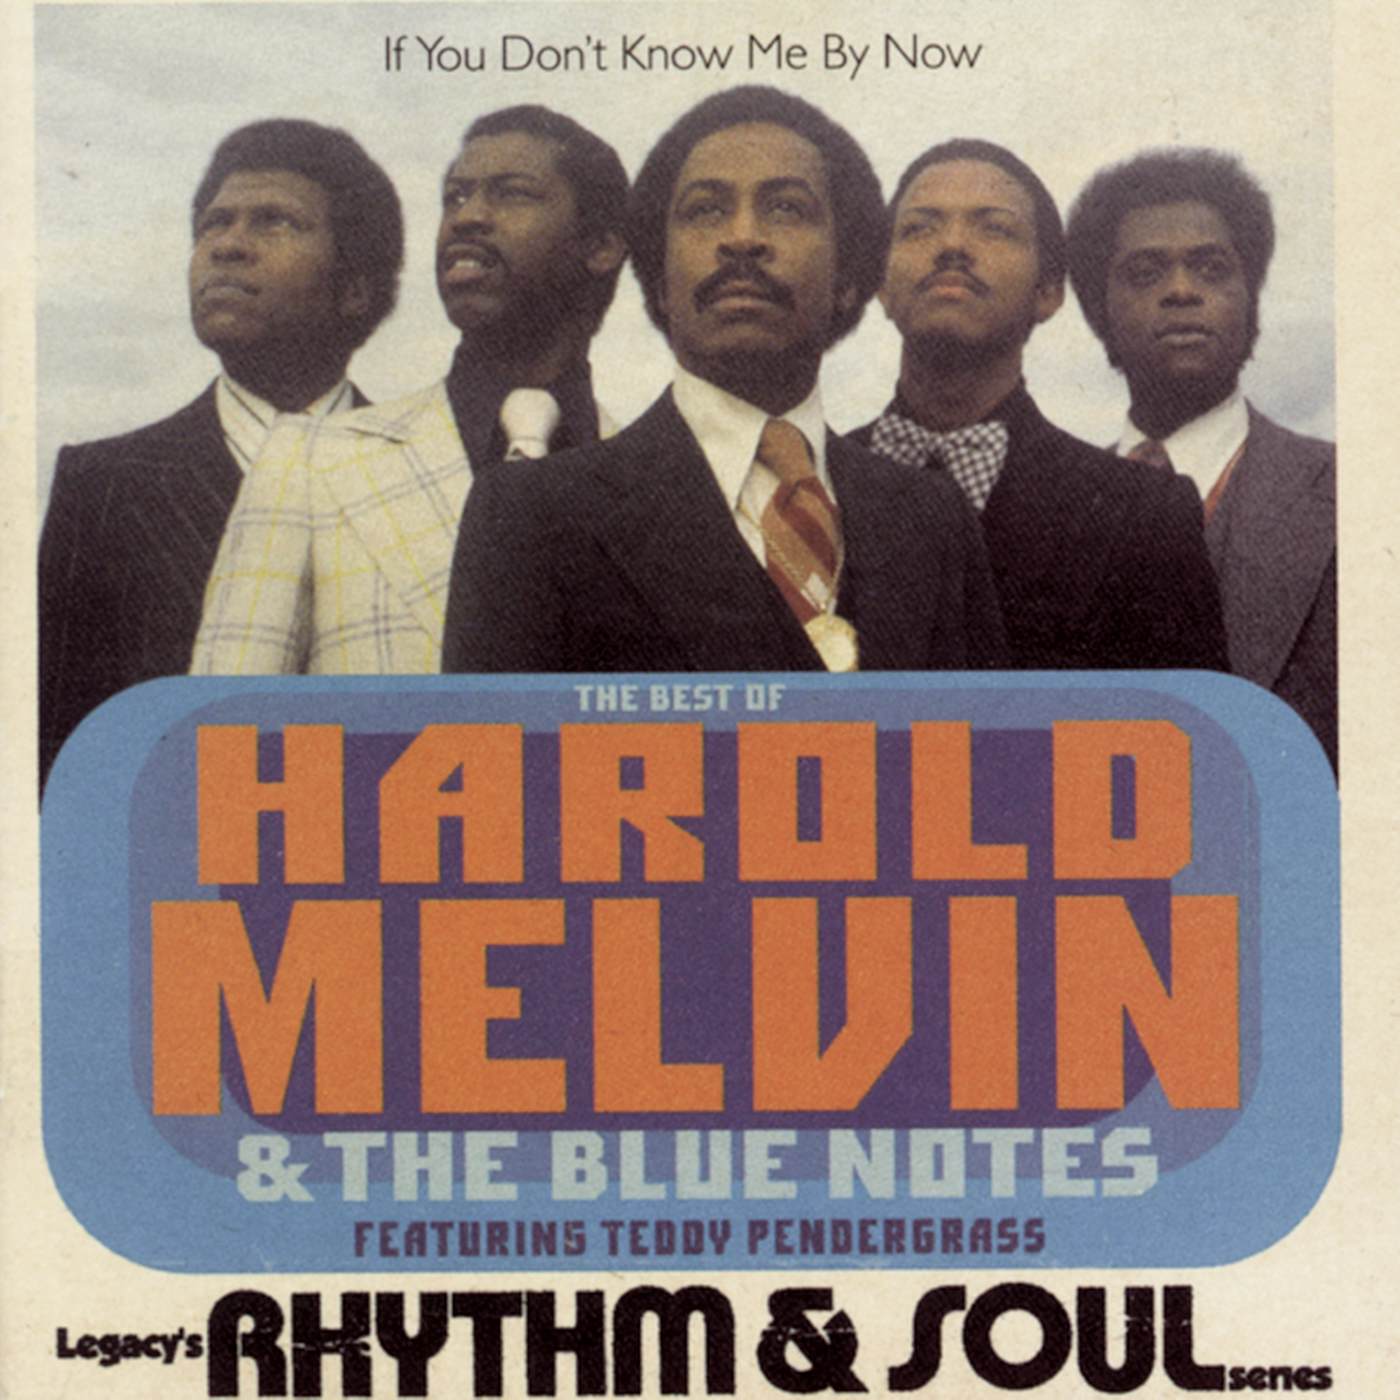 Harold Melvin & The Blue Notes IF YOU DON'T KNOW ME BY NOW: BEST OF CD